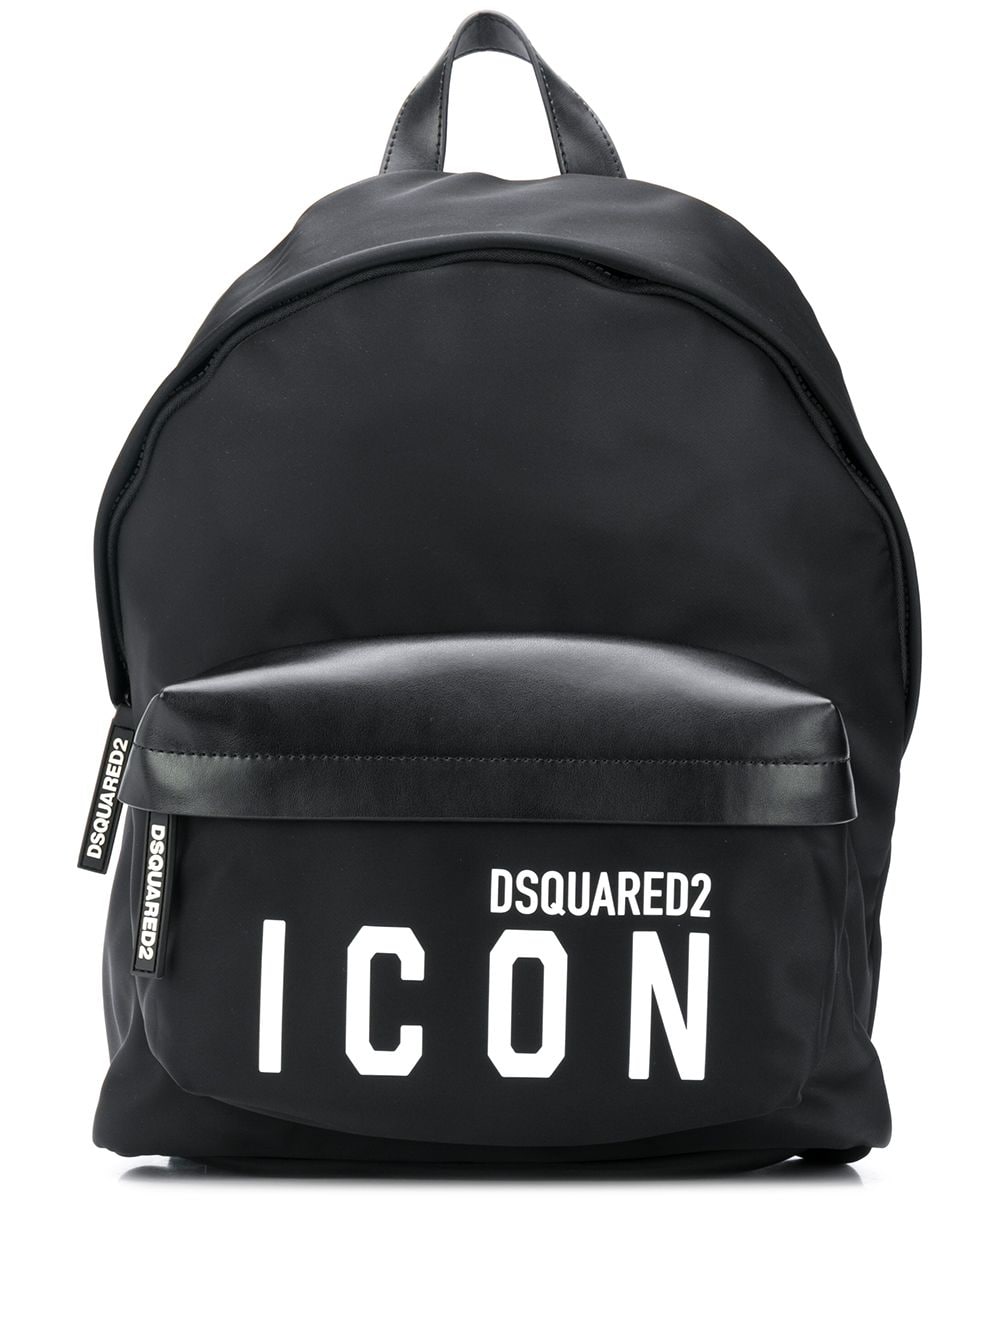 Dsquared2 ICON print backpack